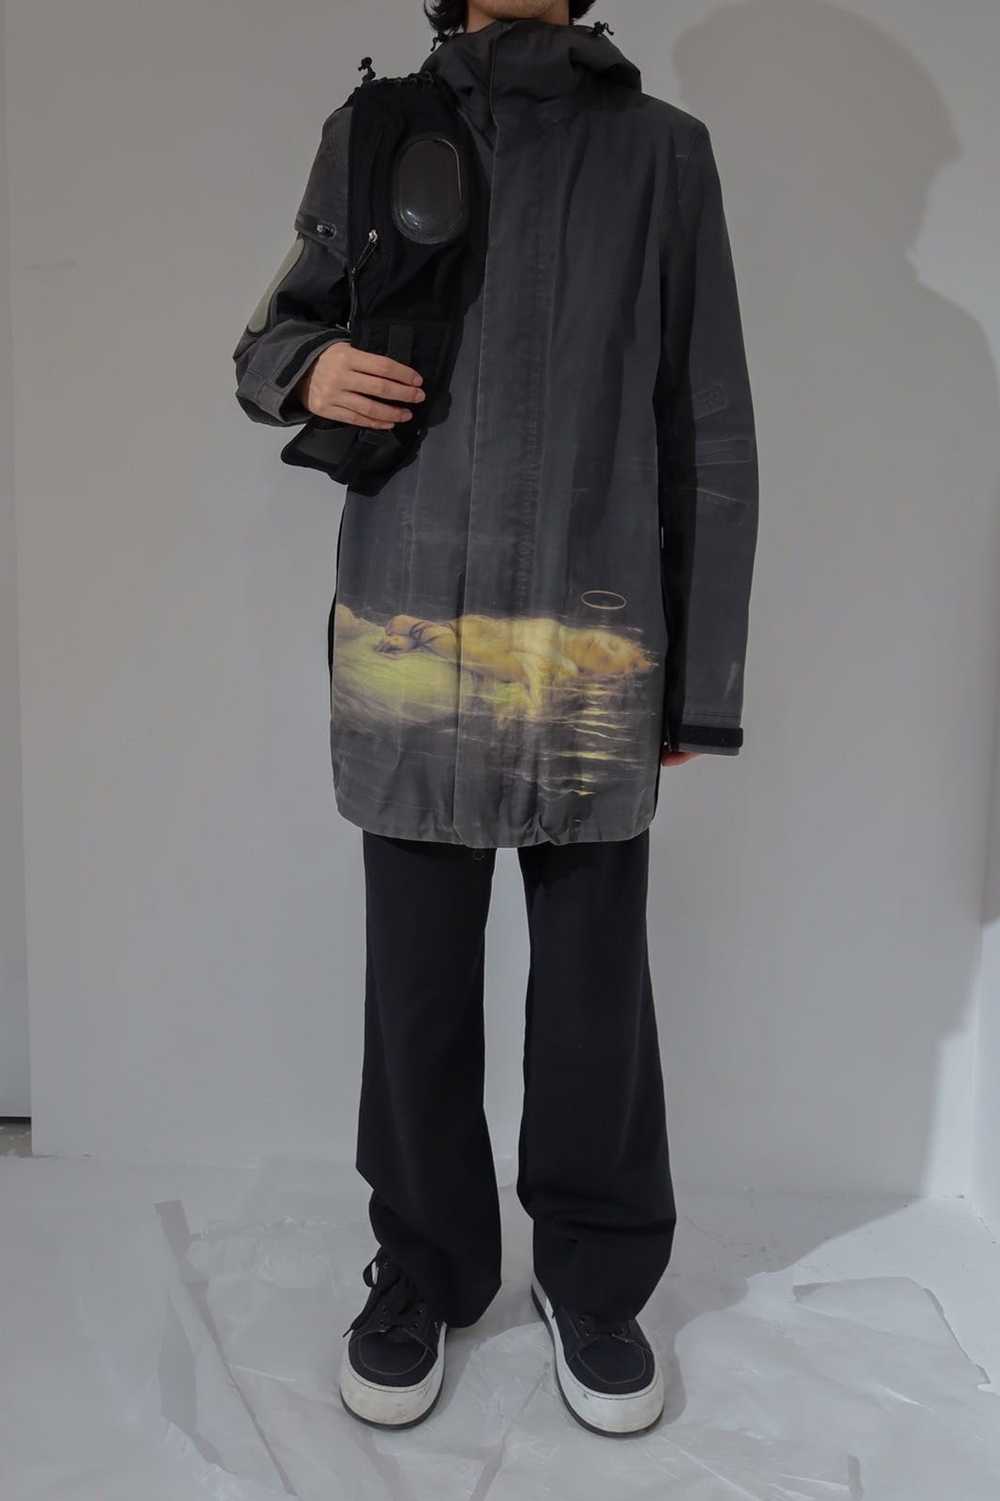 Undercover S/S 2009 Neo Boys “Young Martyr” Goret… - image 4